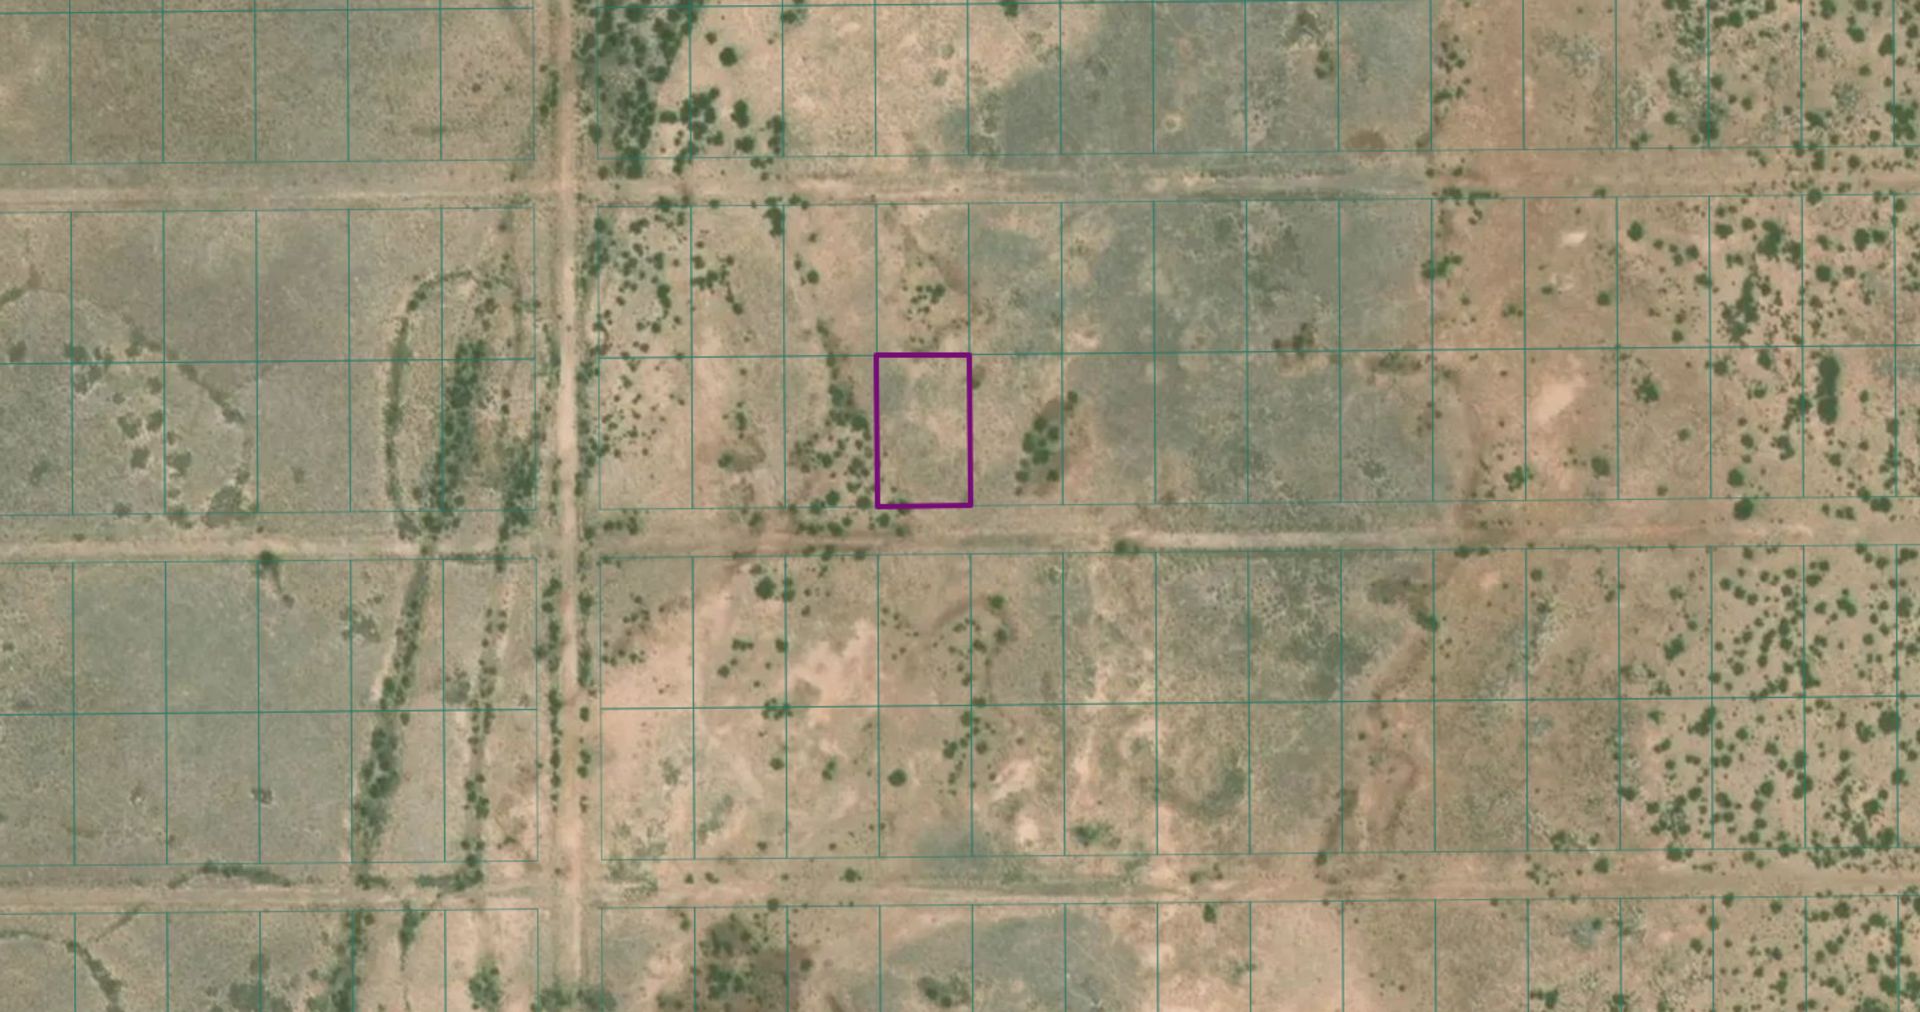 Half an Acre in Luna County, New Mexico! - Image 8 of 15